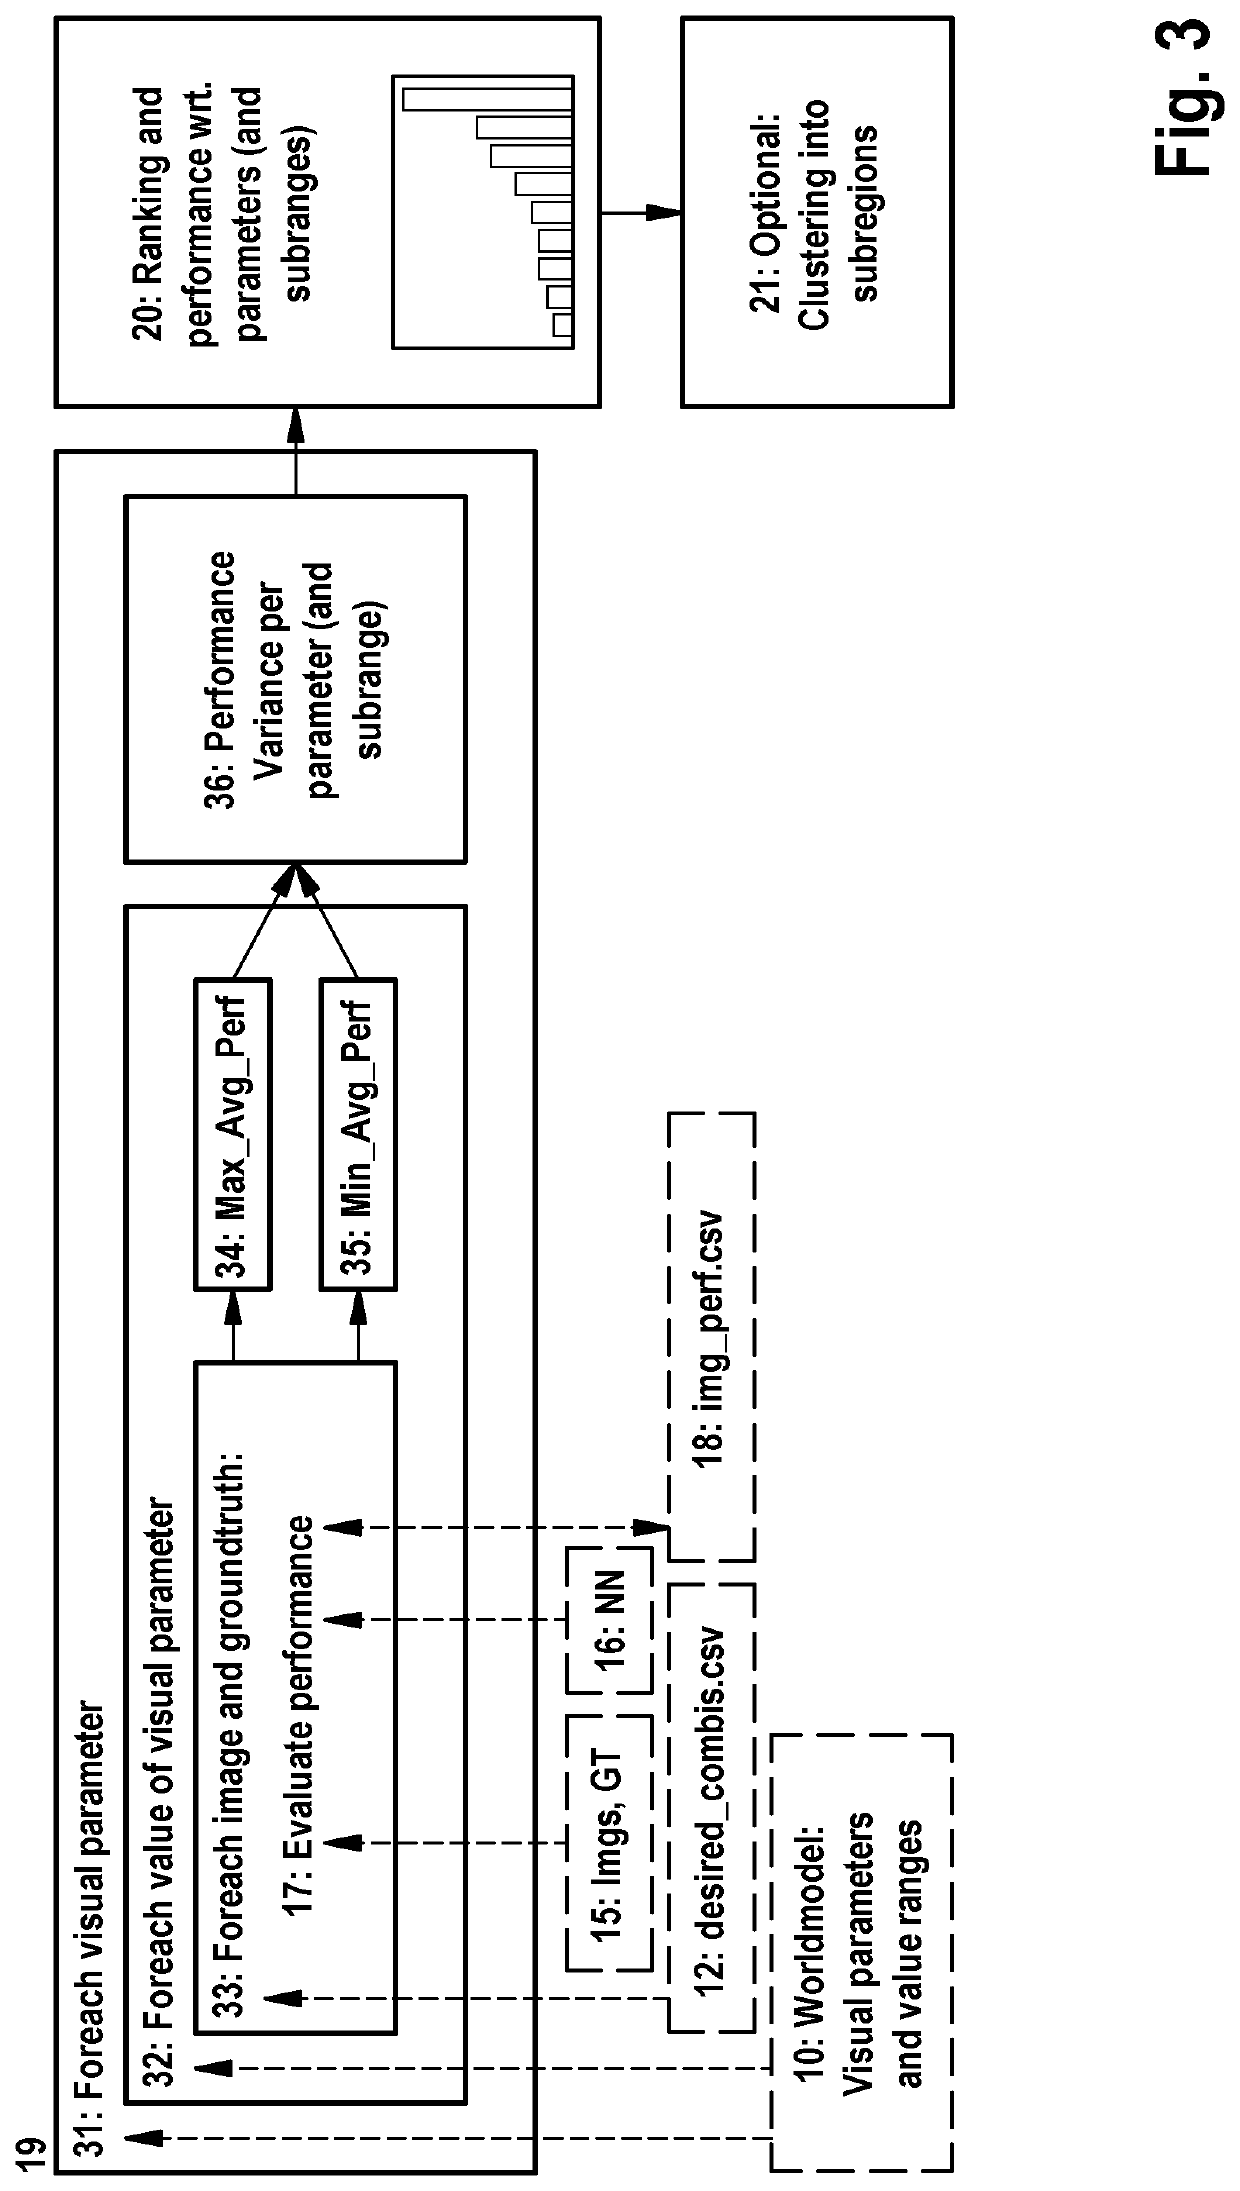 Generating a data structure for specifying visual data sets